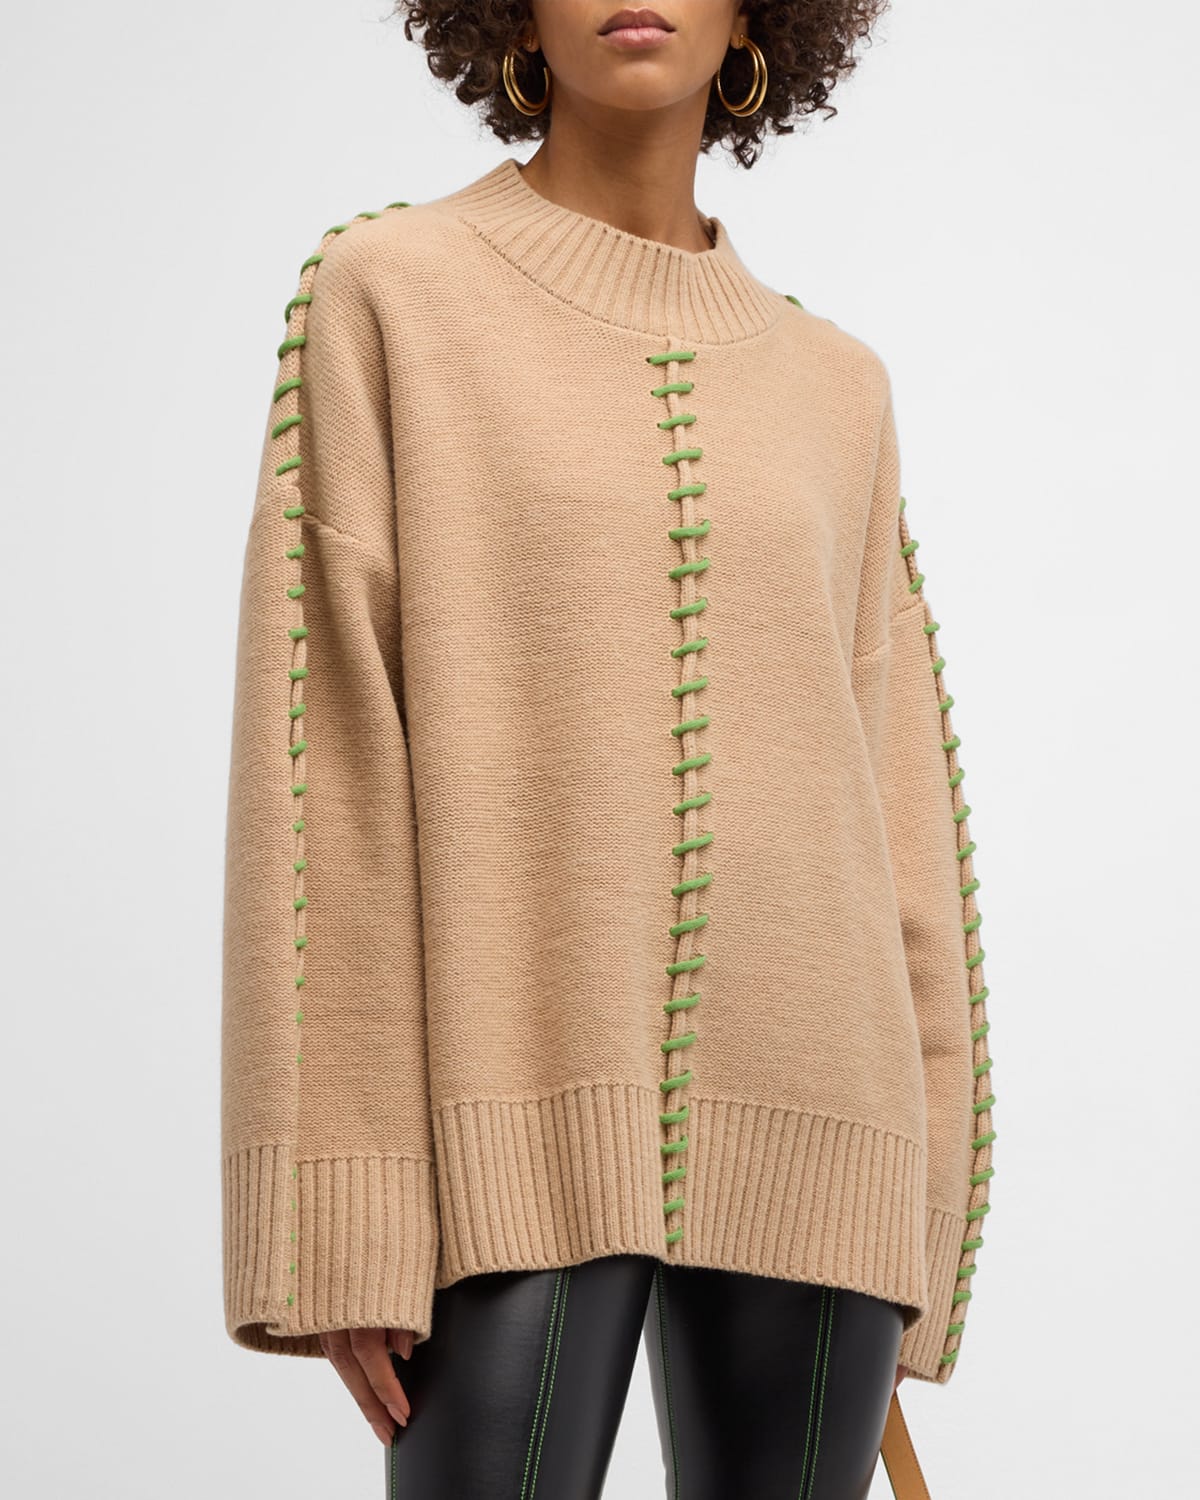 SIMON MILLER LEITH OVERSIZED LACE-UP jumper